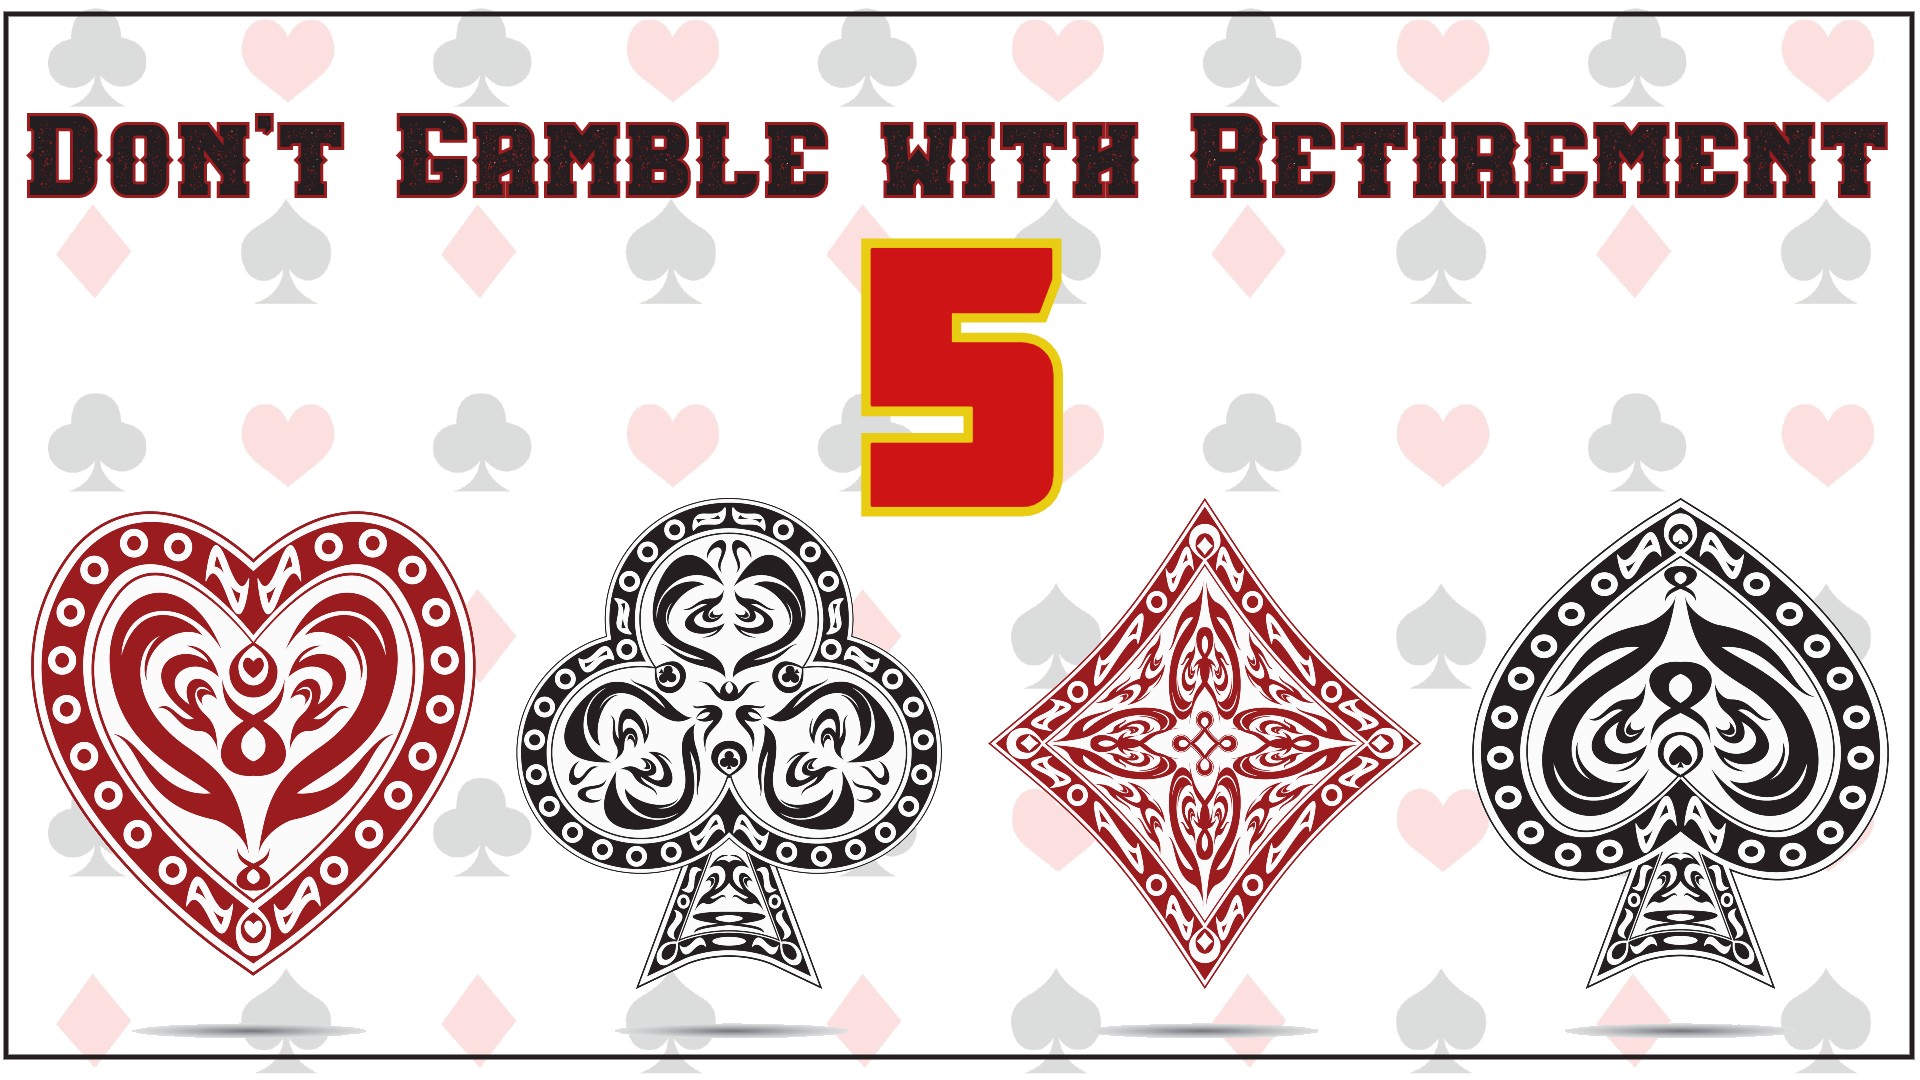 Don’t Gamble with Retirement 5